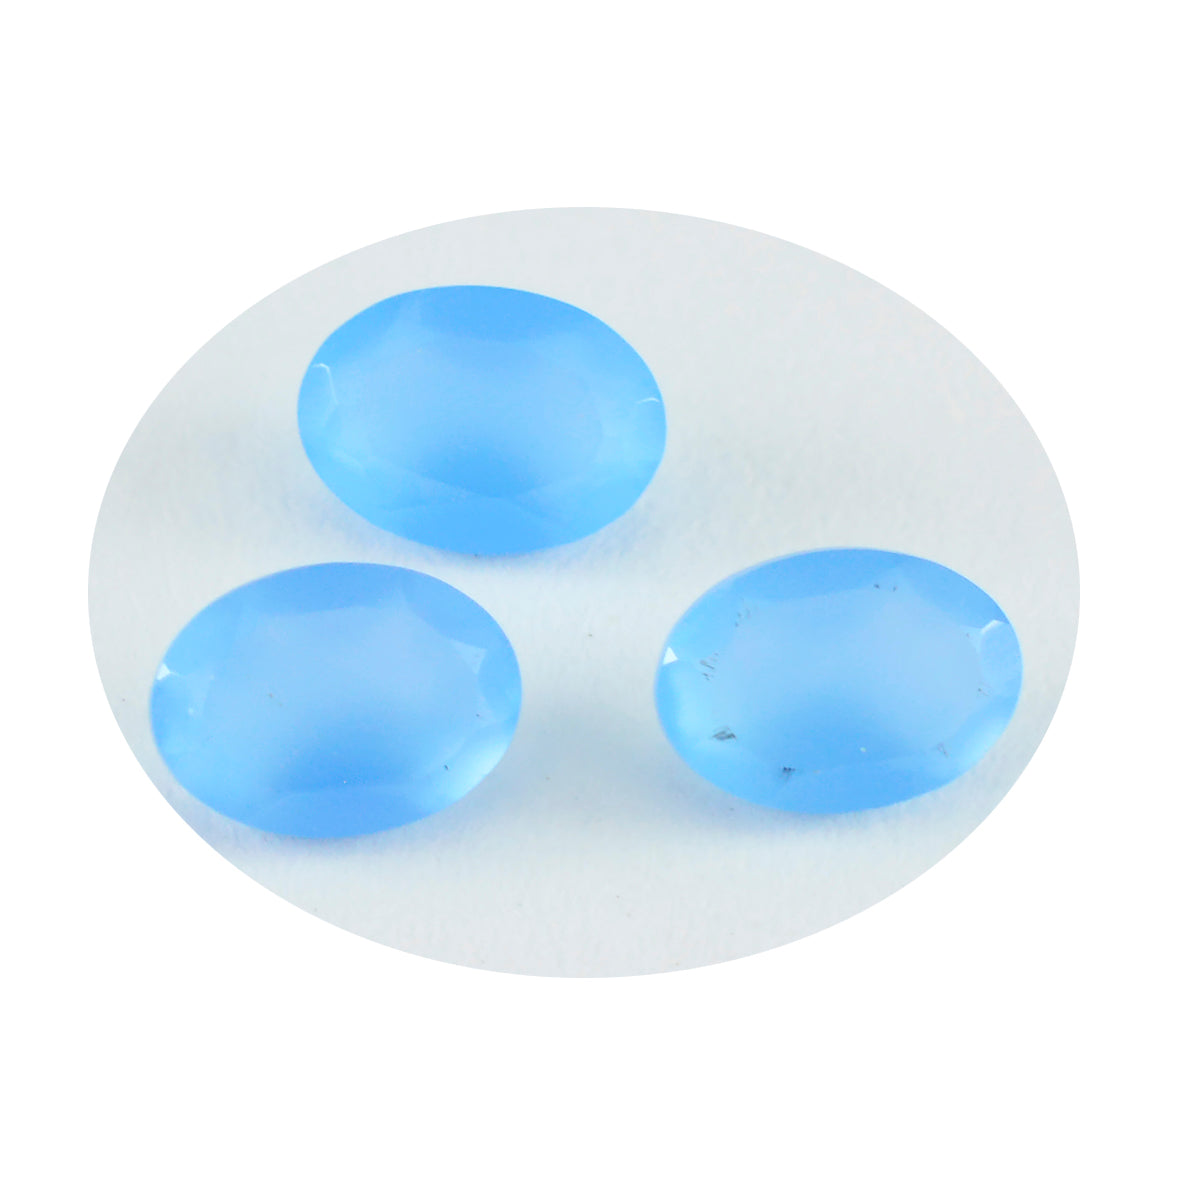 Riyogems 1PC Natural Blue Chalcedony Faceted 8x10 mm Oval Shape nice-looking Quality Gem